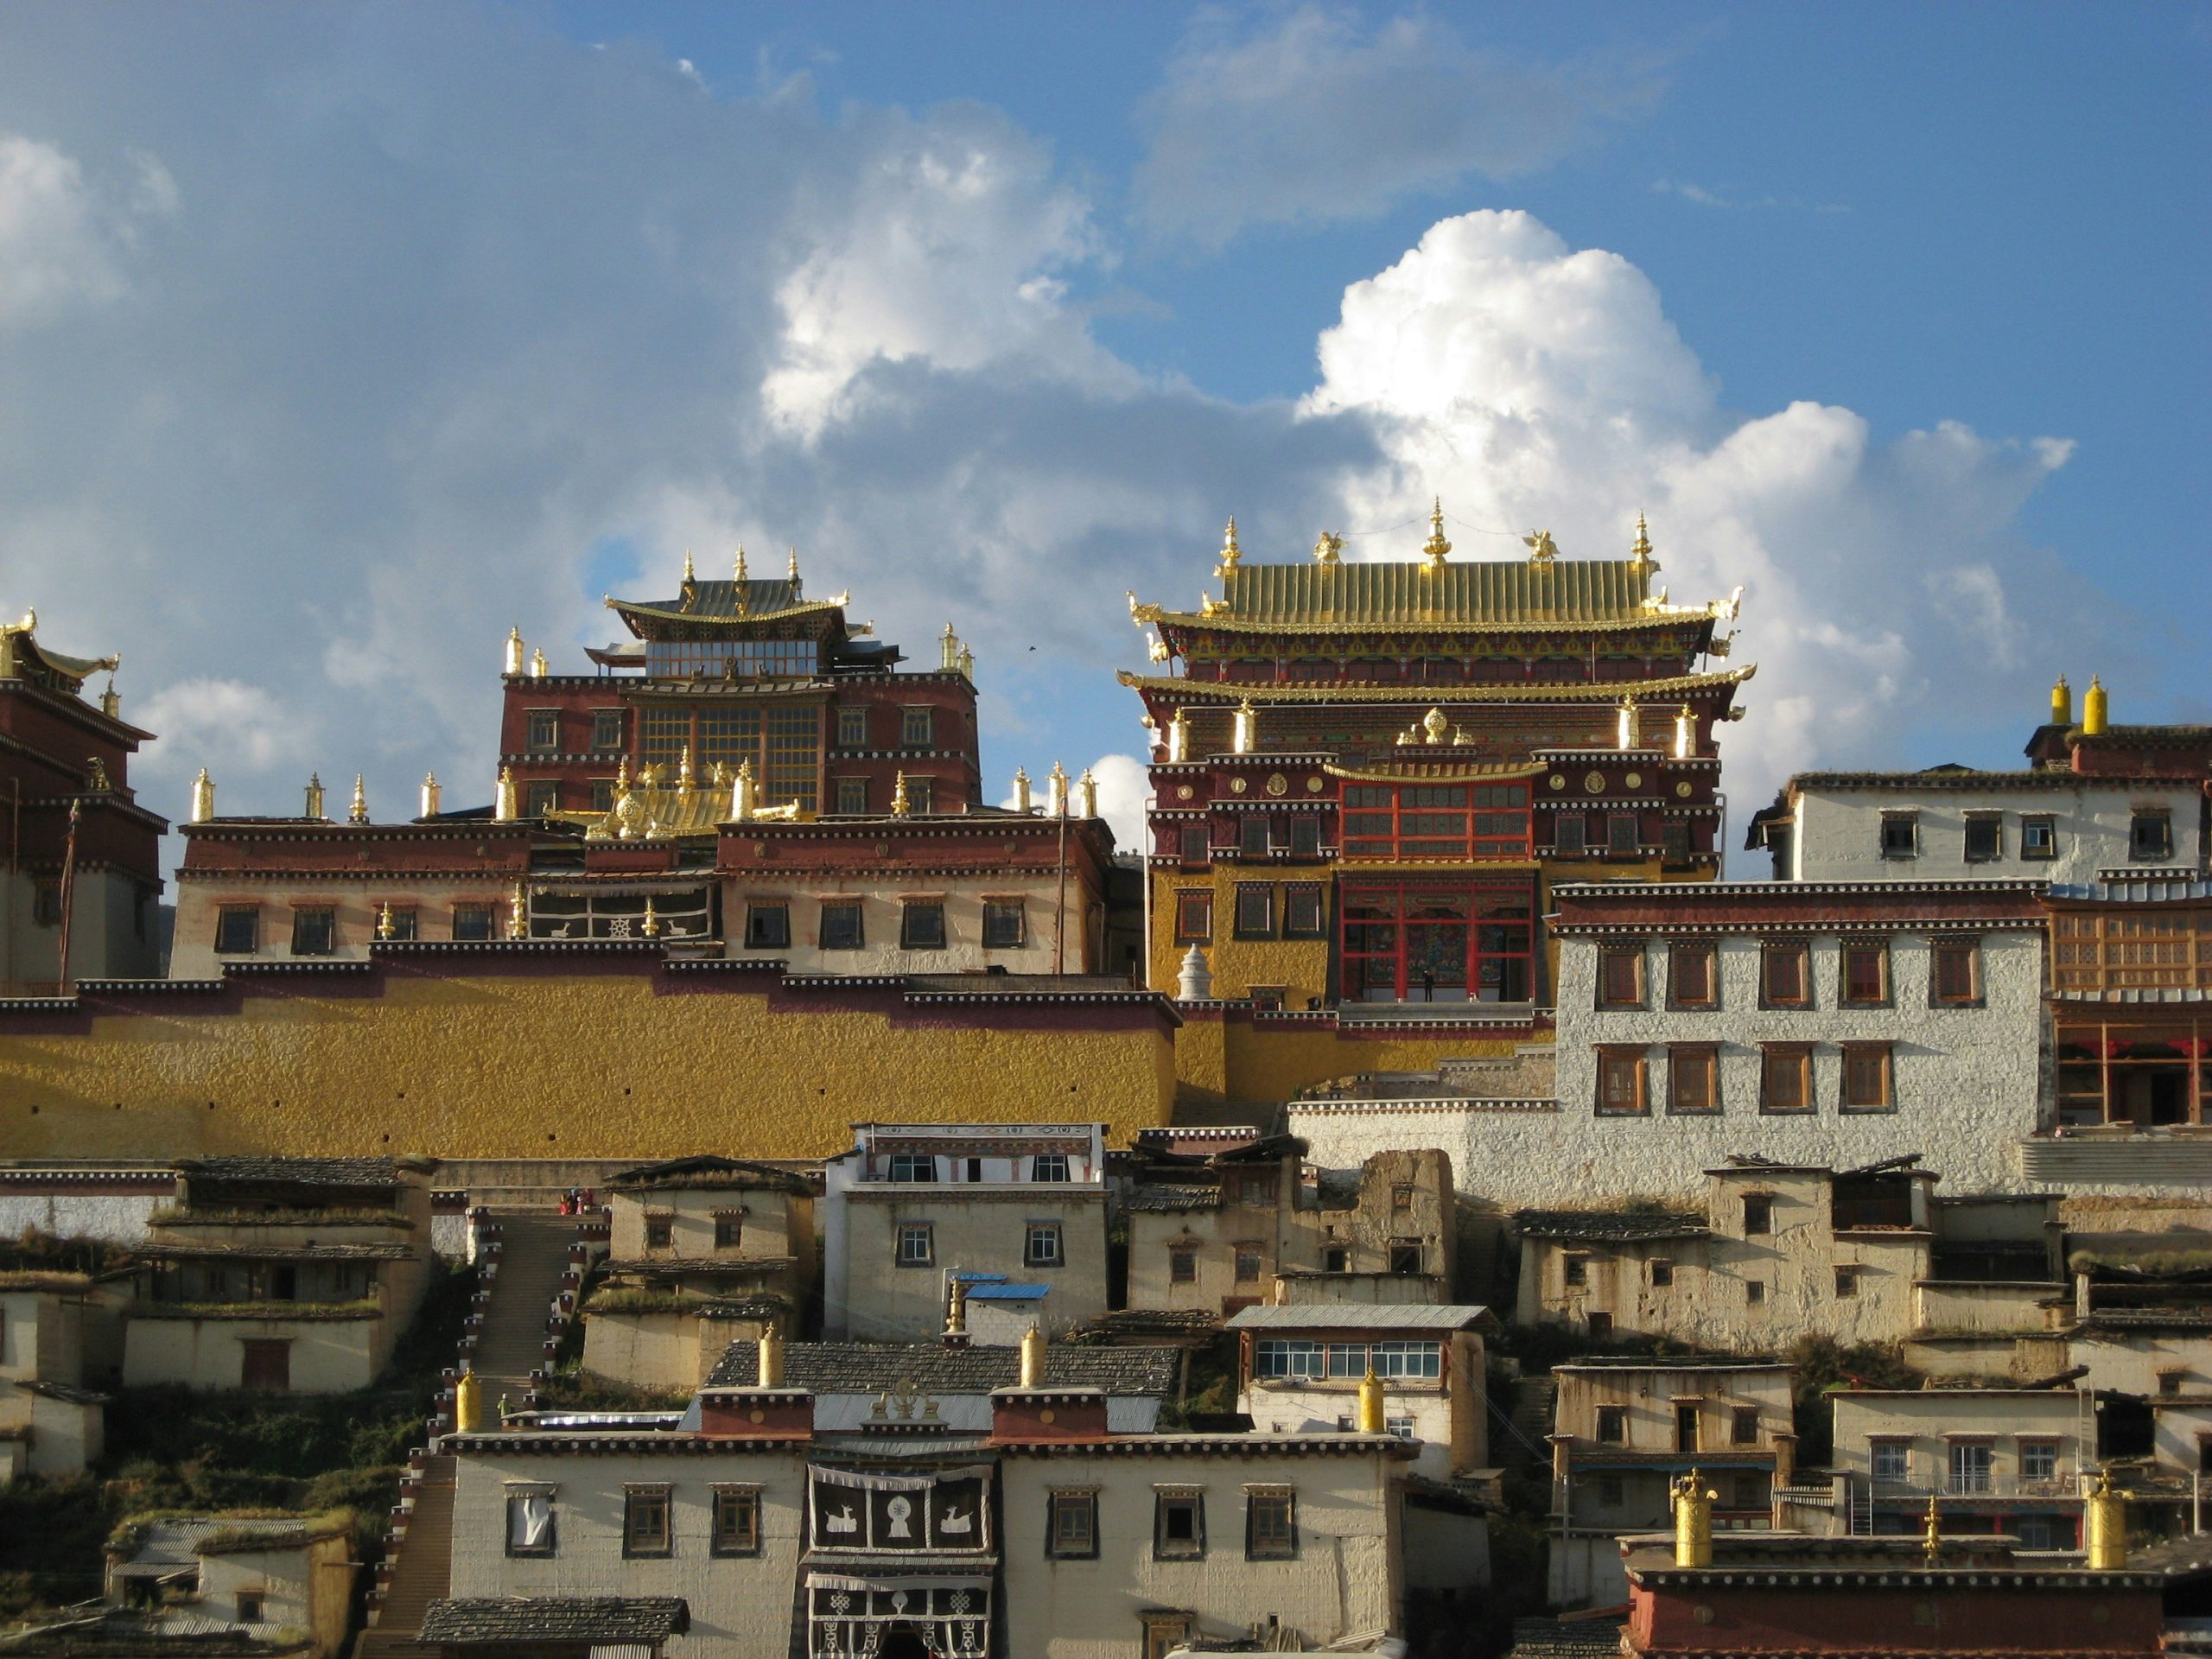 experience the tranquility of a tibetan monastery visit and immerse yourself in its rich cultural heritage and spiritual surroundings.